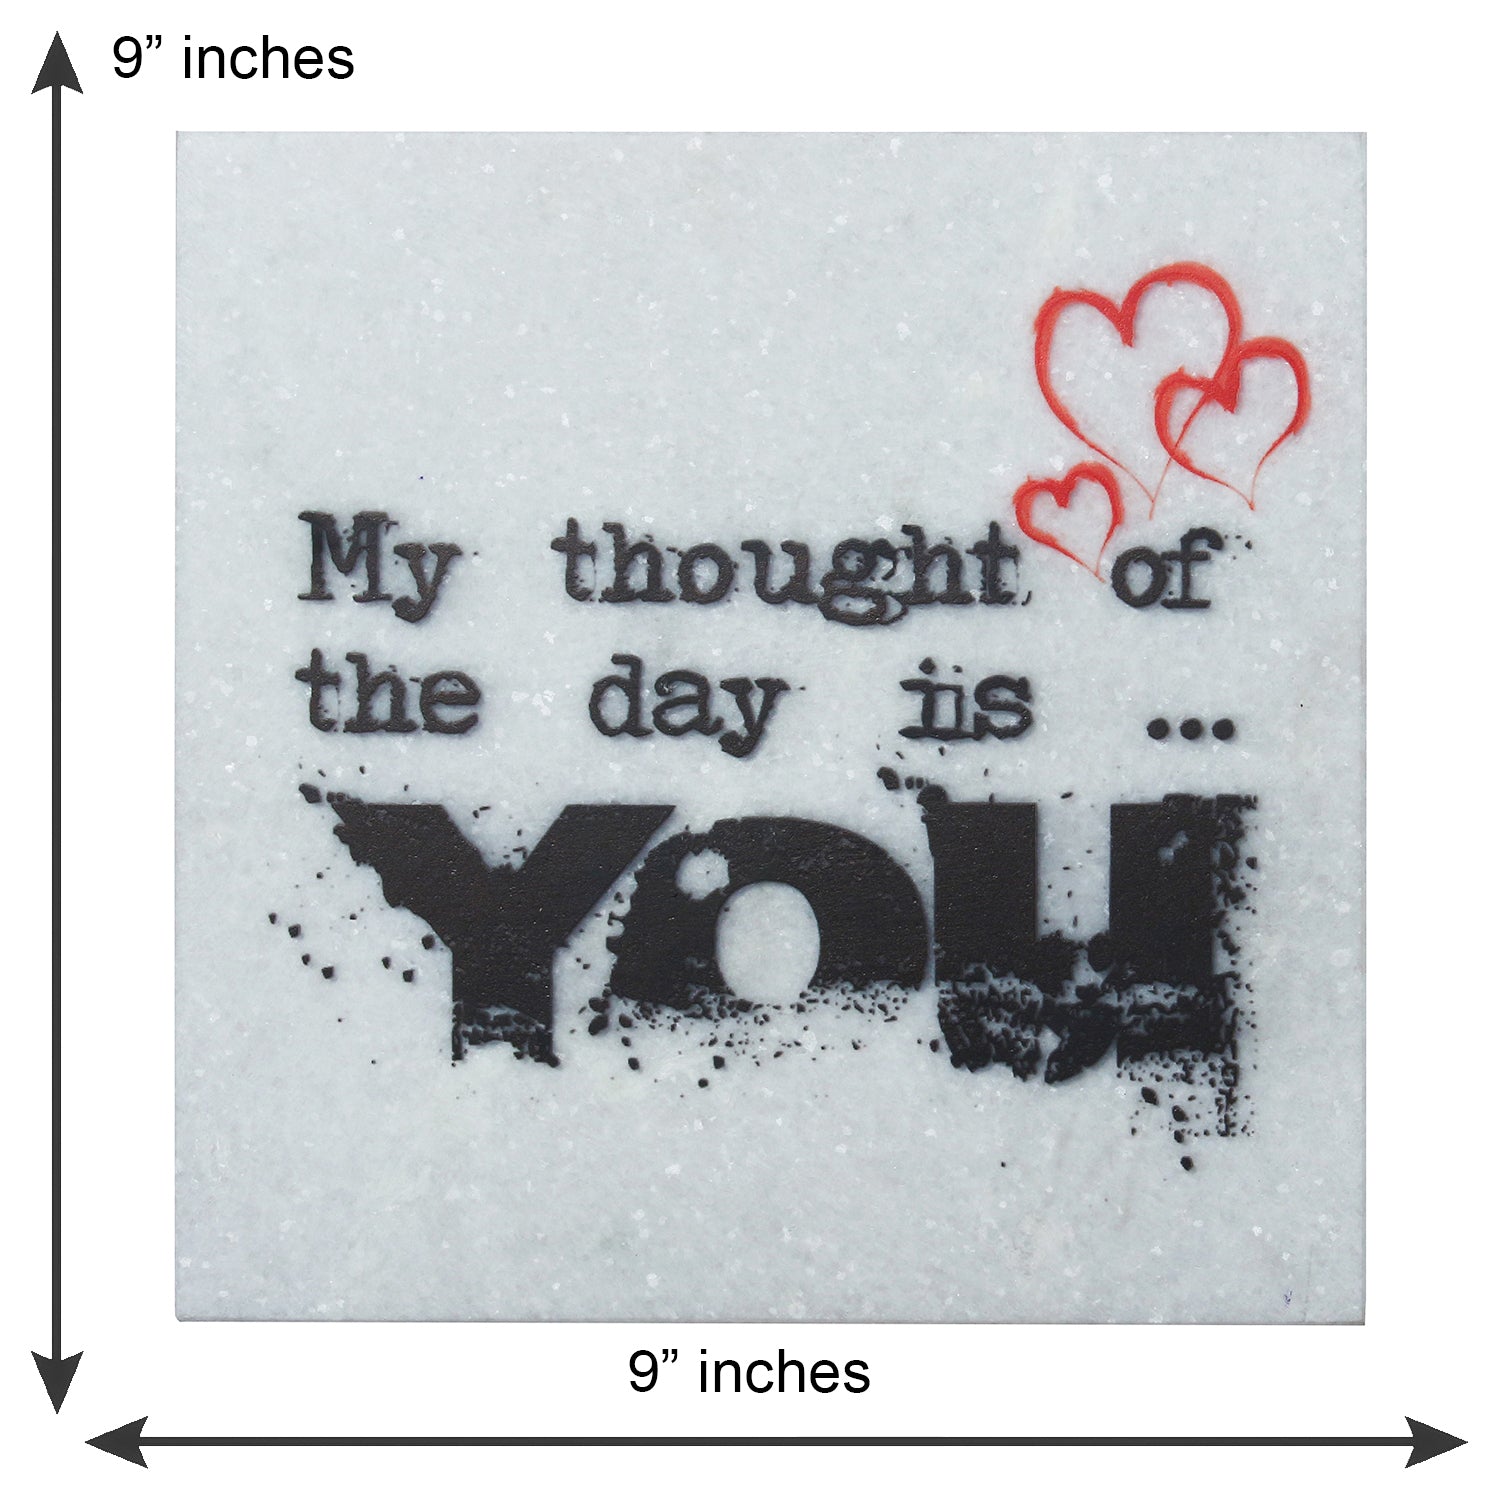 "My thought of the day is YOU" Quotation Painting On Marble Square Tile 2